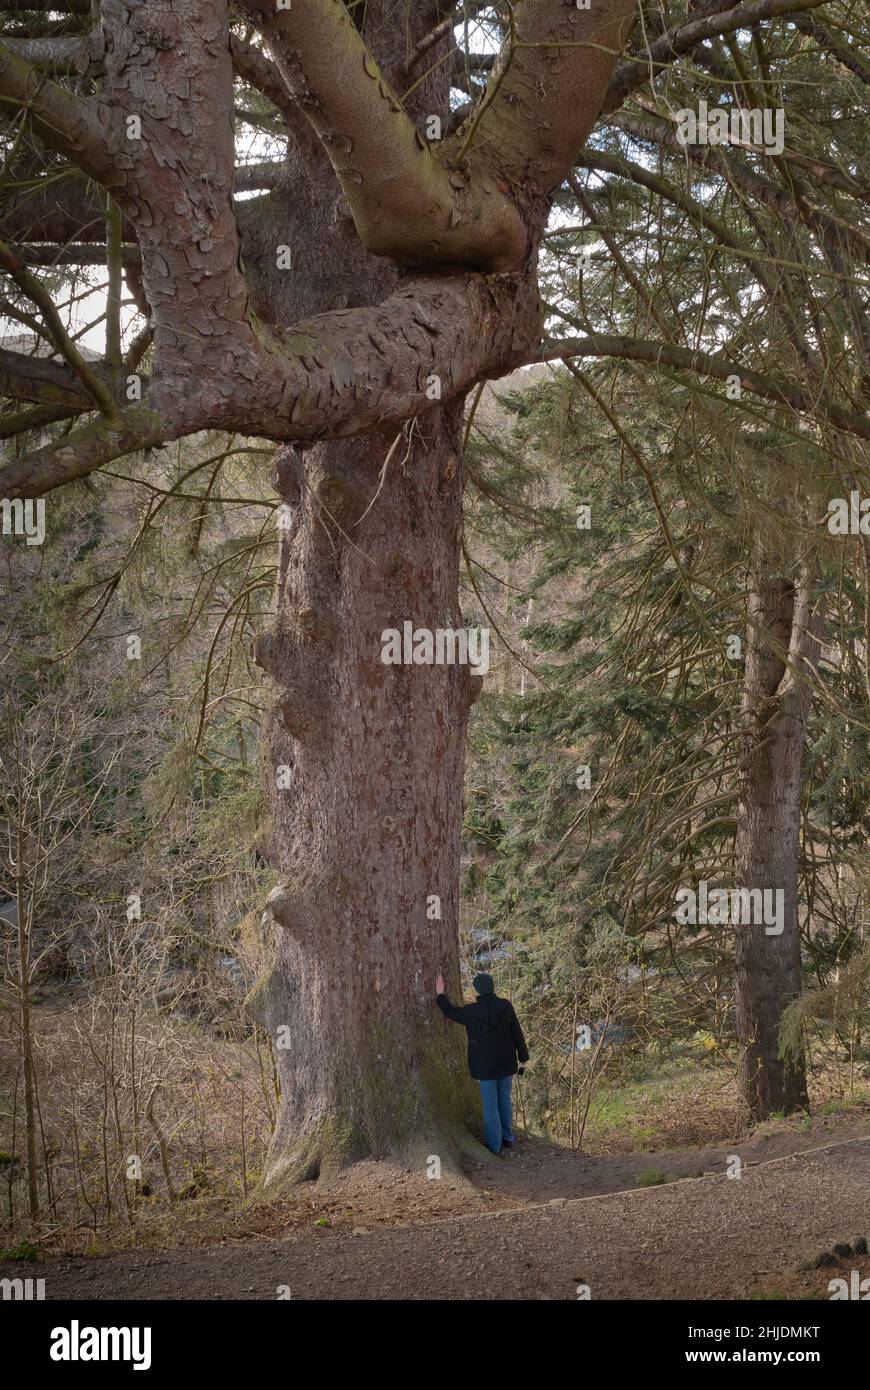 Large spruce tree in the Lake District, person shows scale. Stock Photo